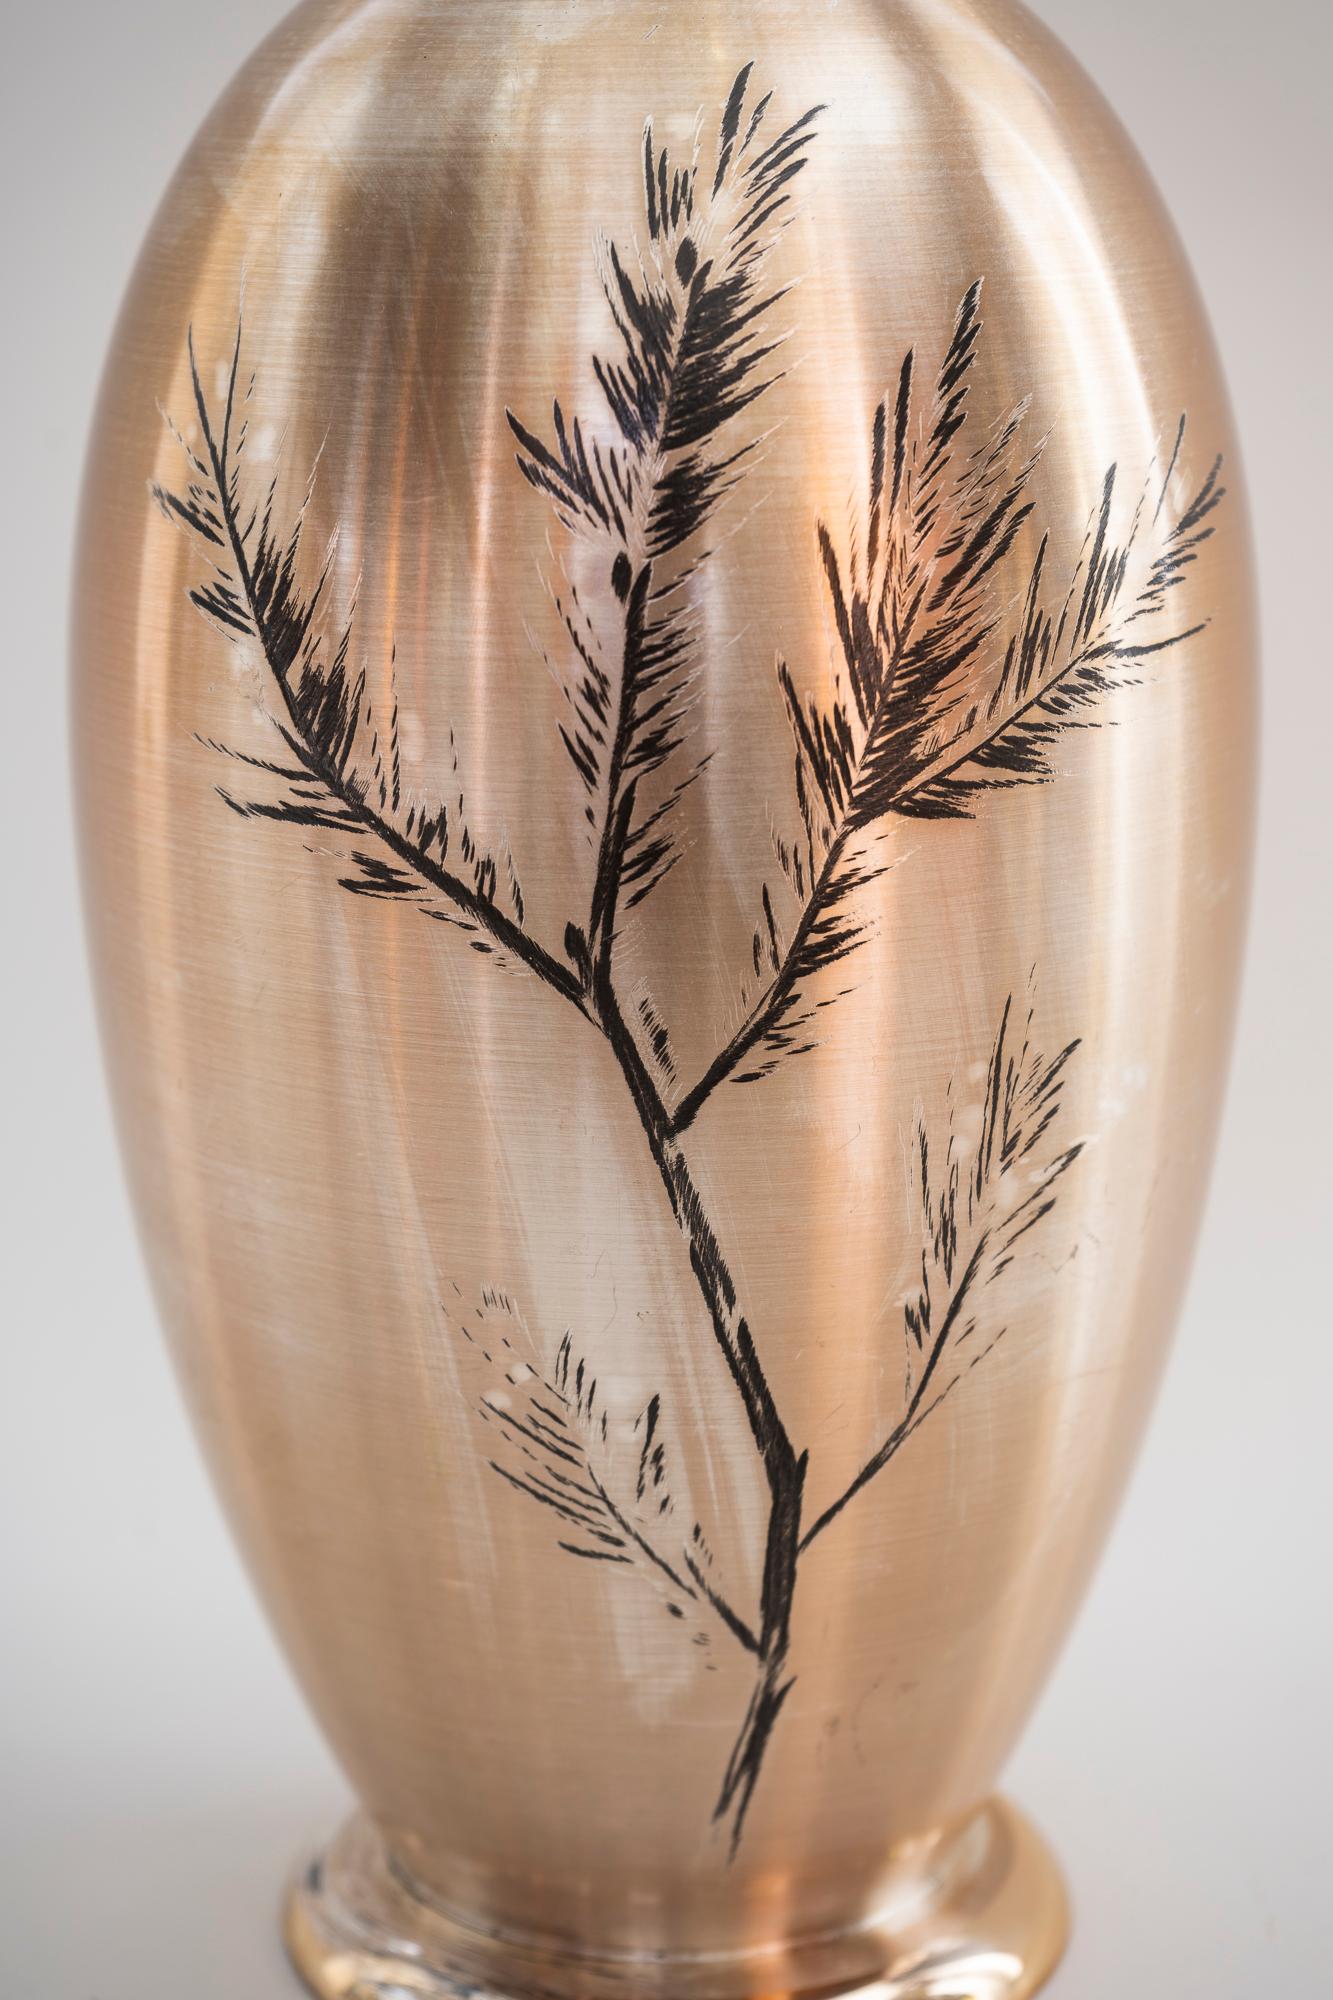 WMF Ikora vase Germany, circa 1930s.
Brass silvered and painted.